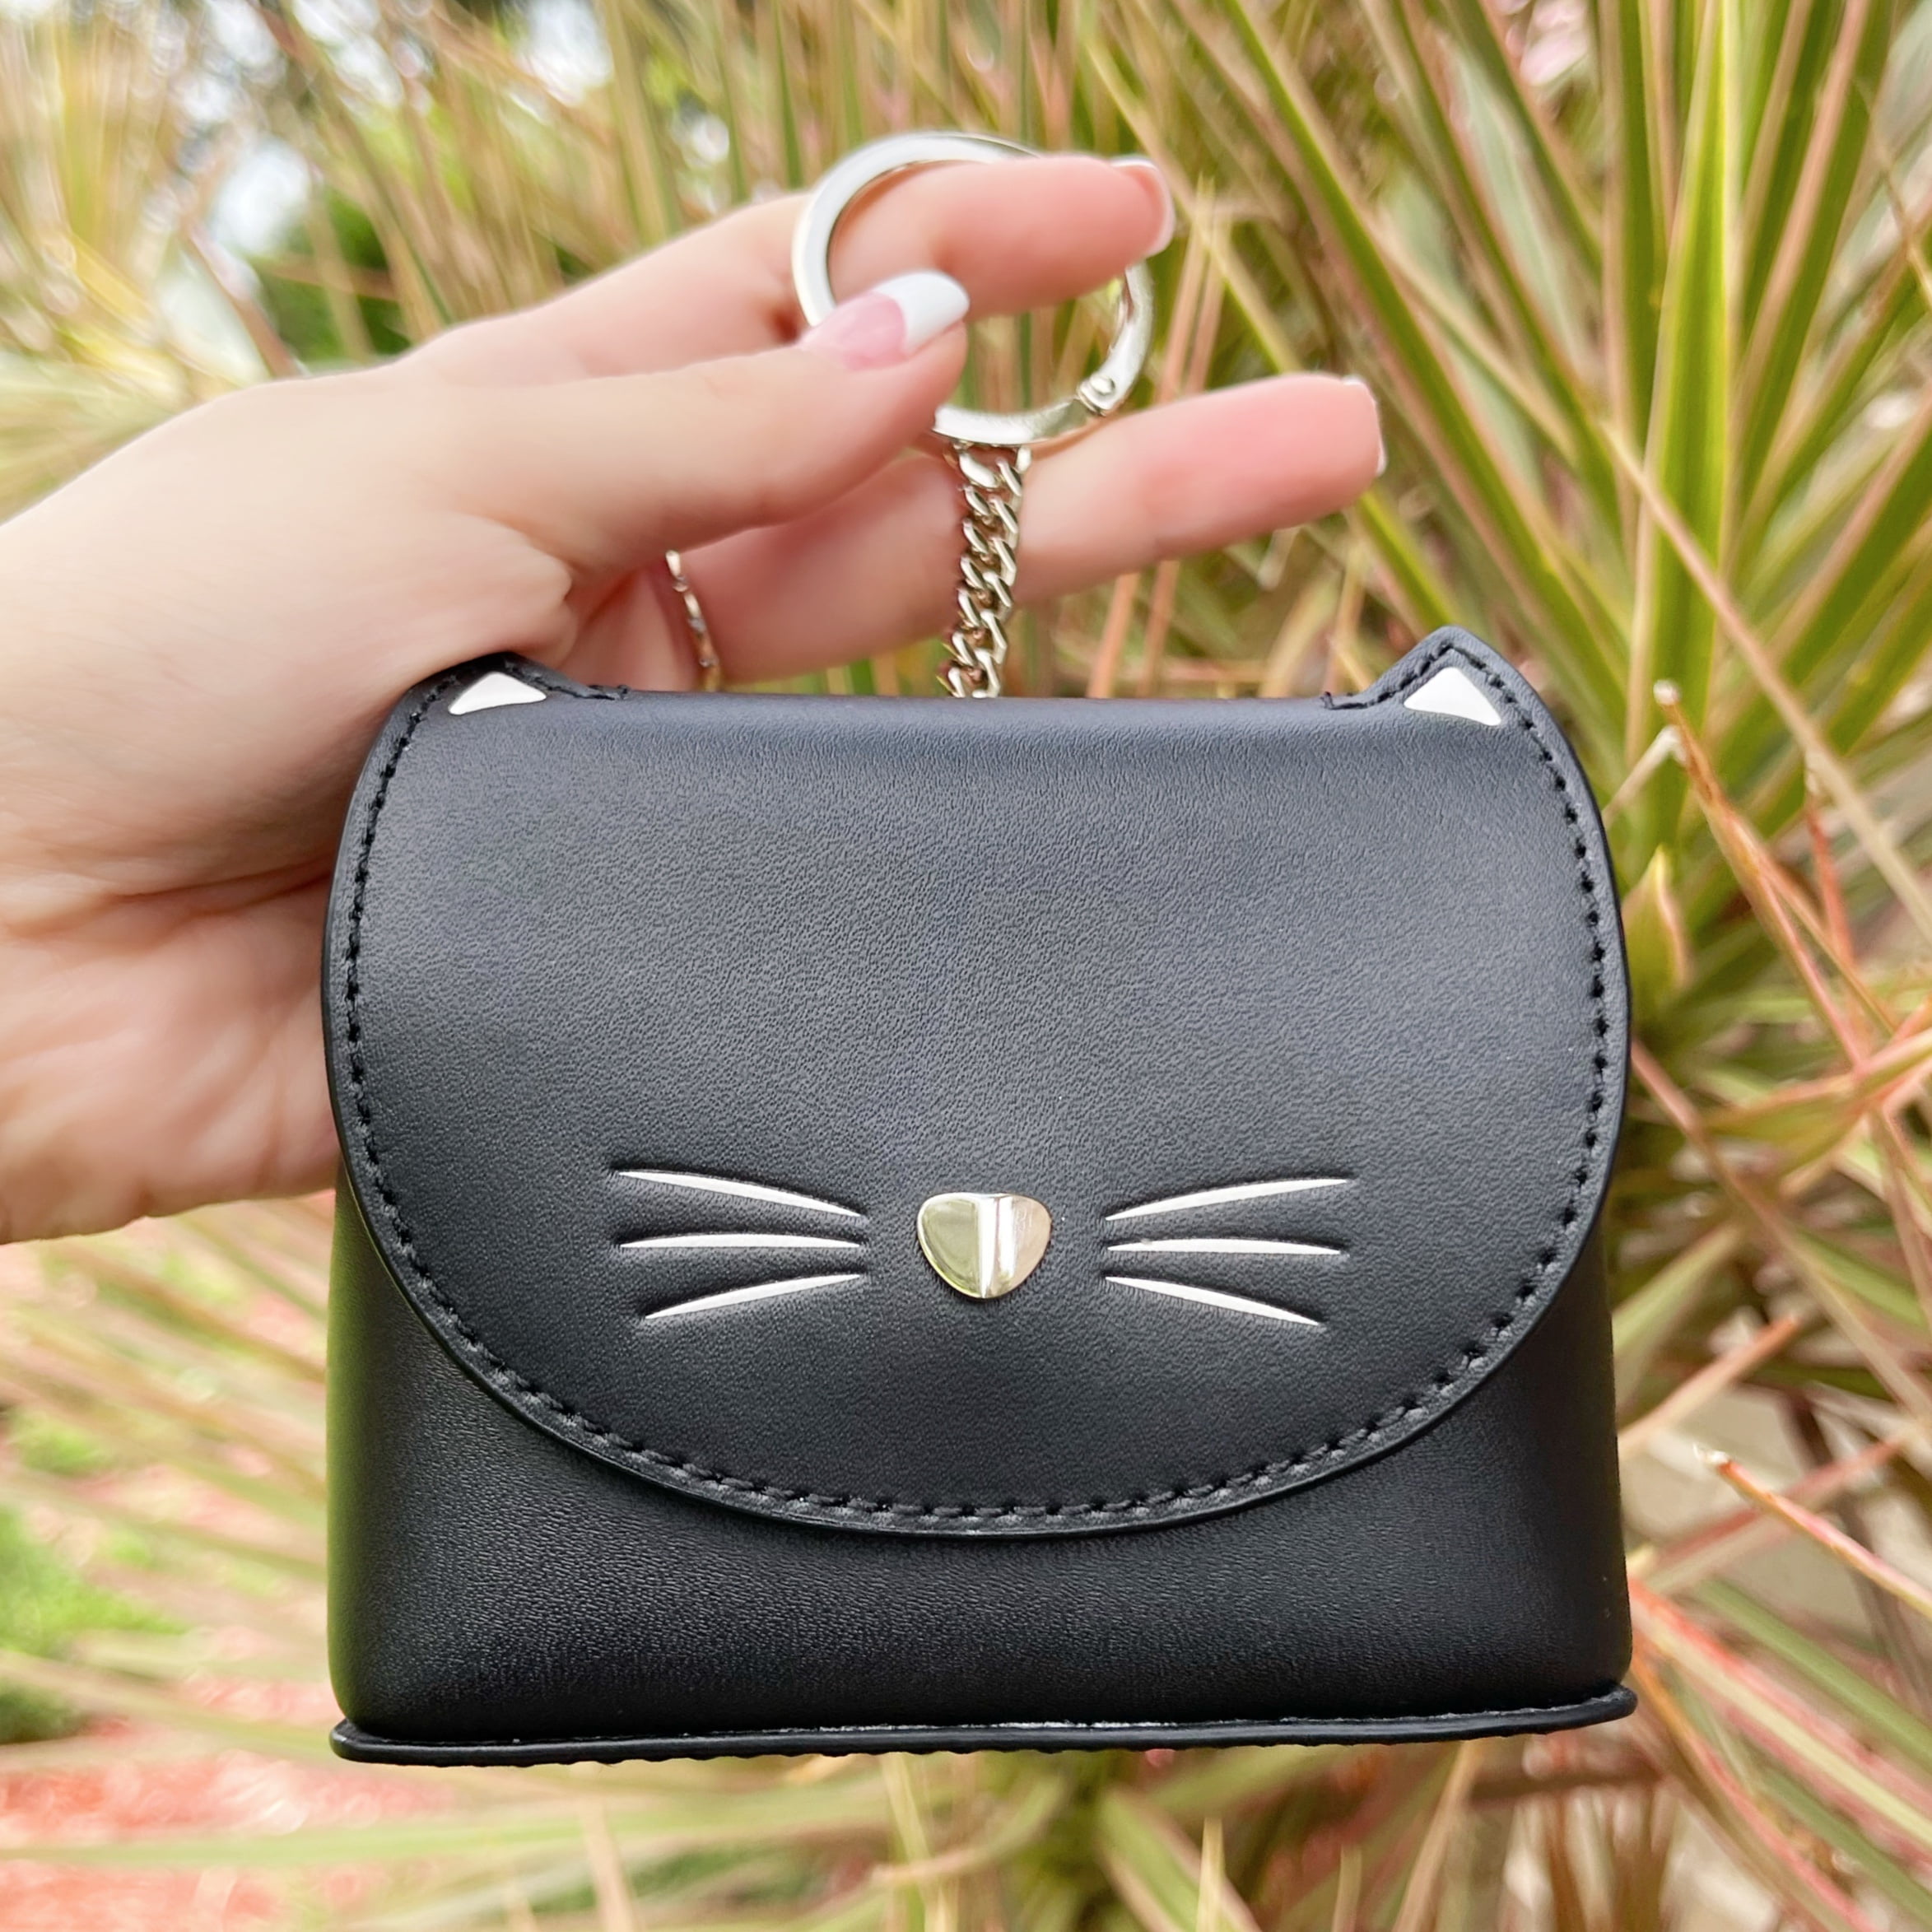 Kate Spade Black Cat Coin Purse Pouch Key Ring Fob Charm Novelty -  